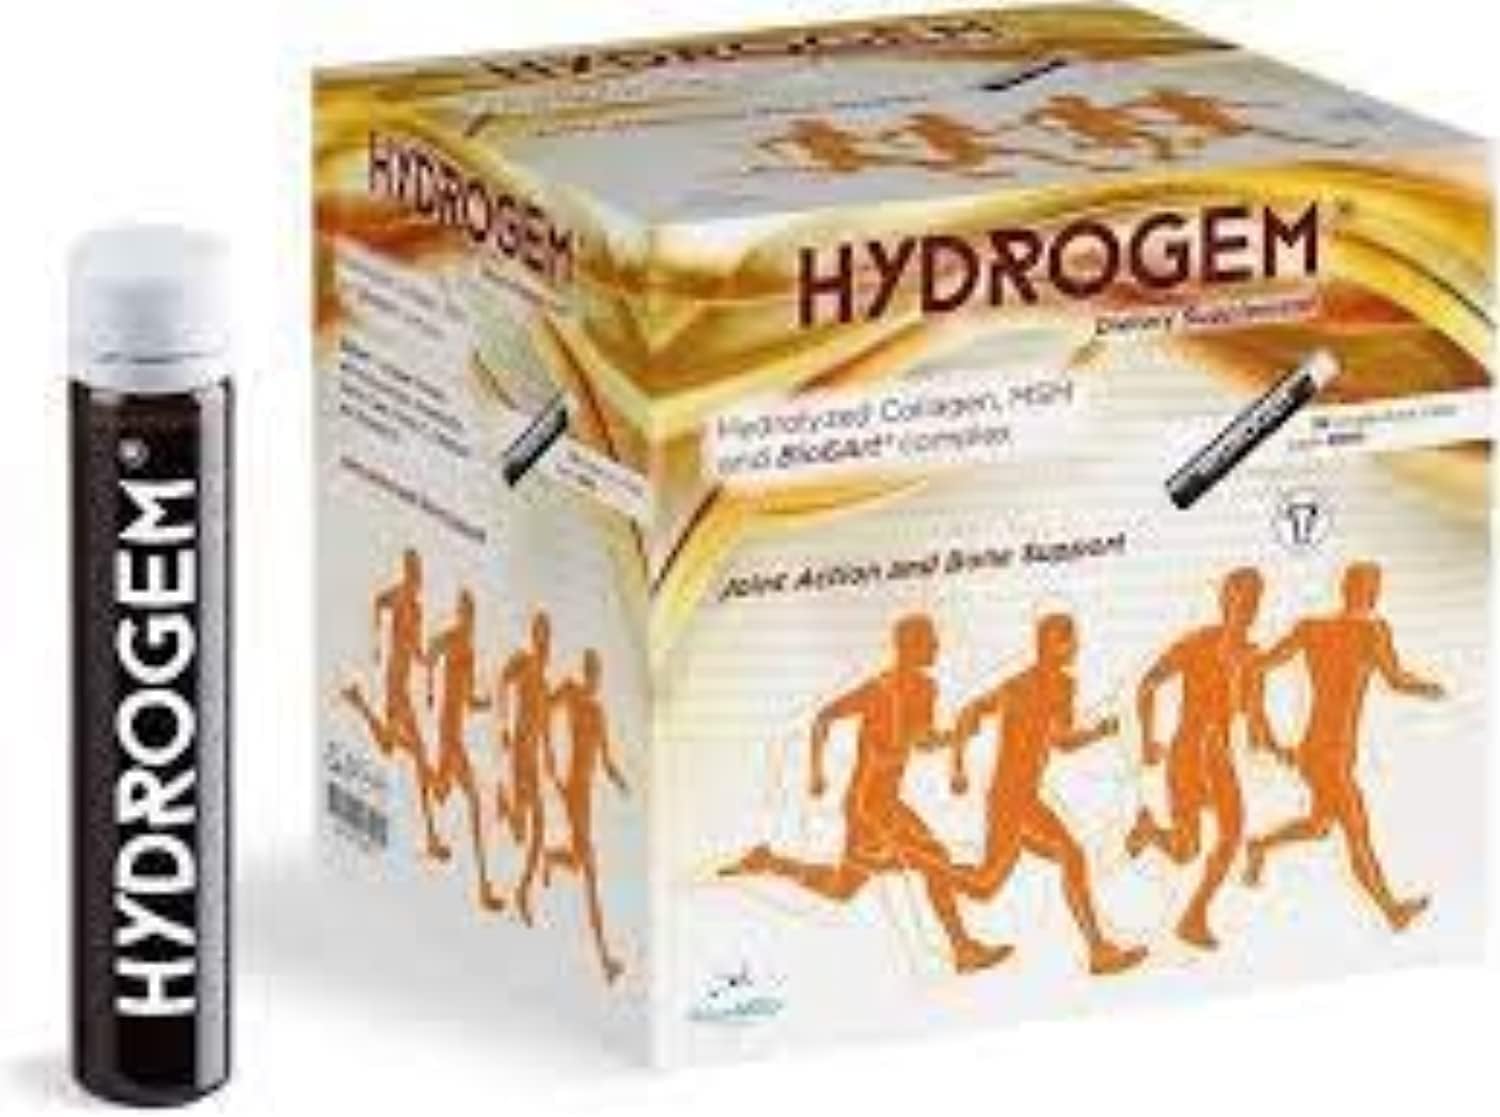 VALUEMED Hydrogem Hydrolyzed Collagen, MSM for Joint Action and Bone Support - 30 Vials